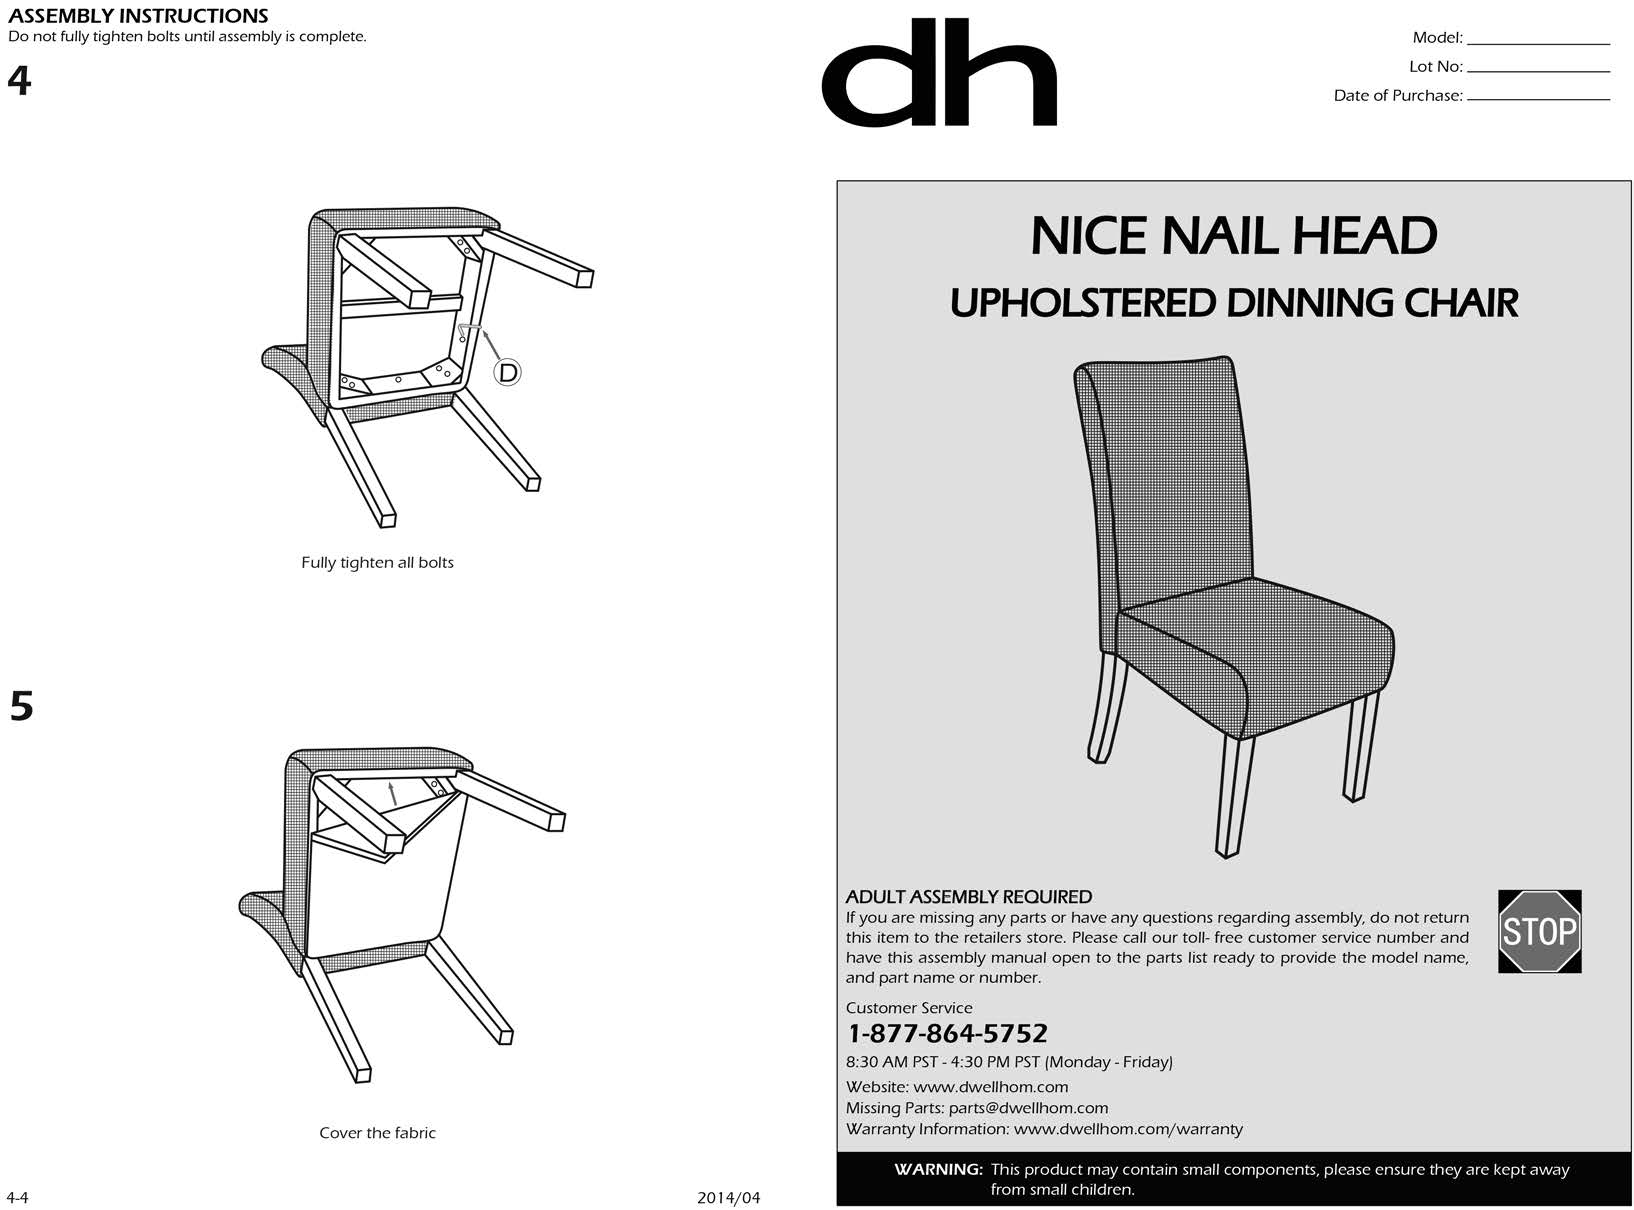 DHI Nice Nail Head Upholstered Dining Chair, 2 Pack, Multiple Colors - image 2 of 7